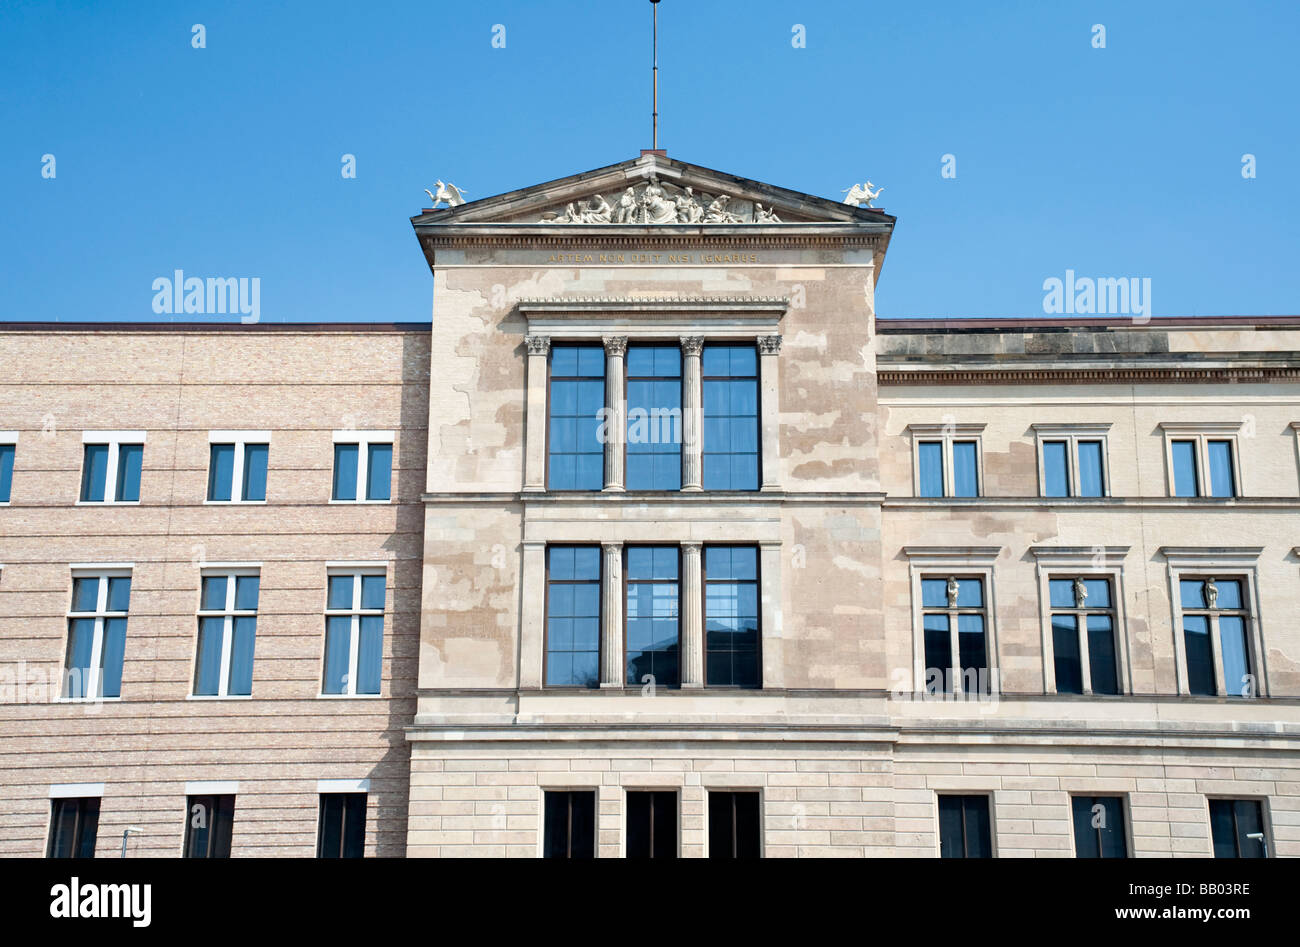 Facade of reconstructed Neues Museum on Museuminsel in central Berlin Stock Photo